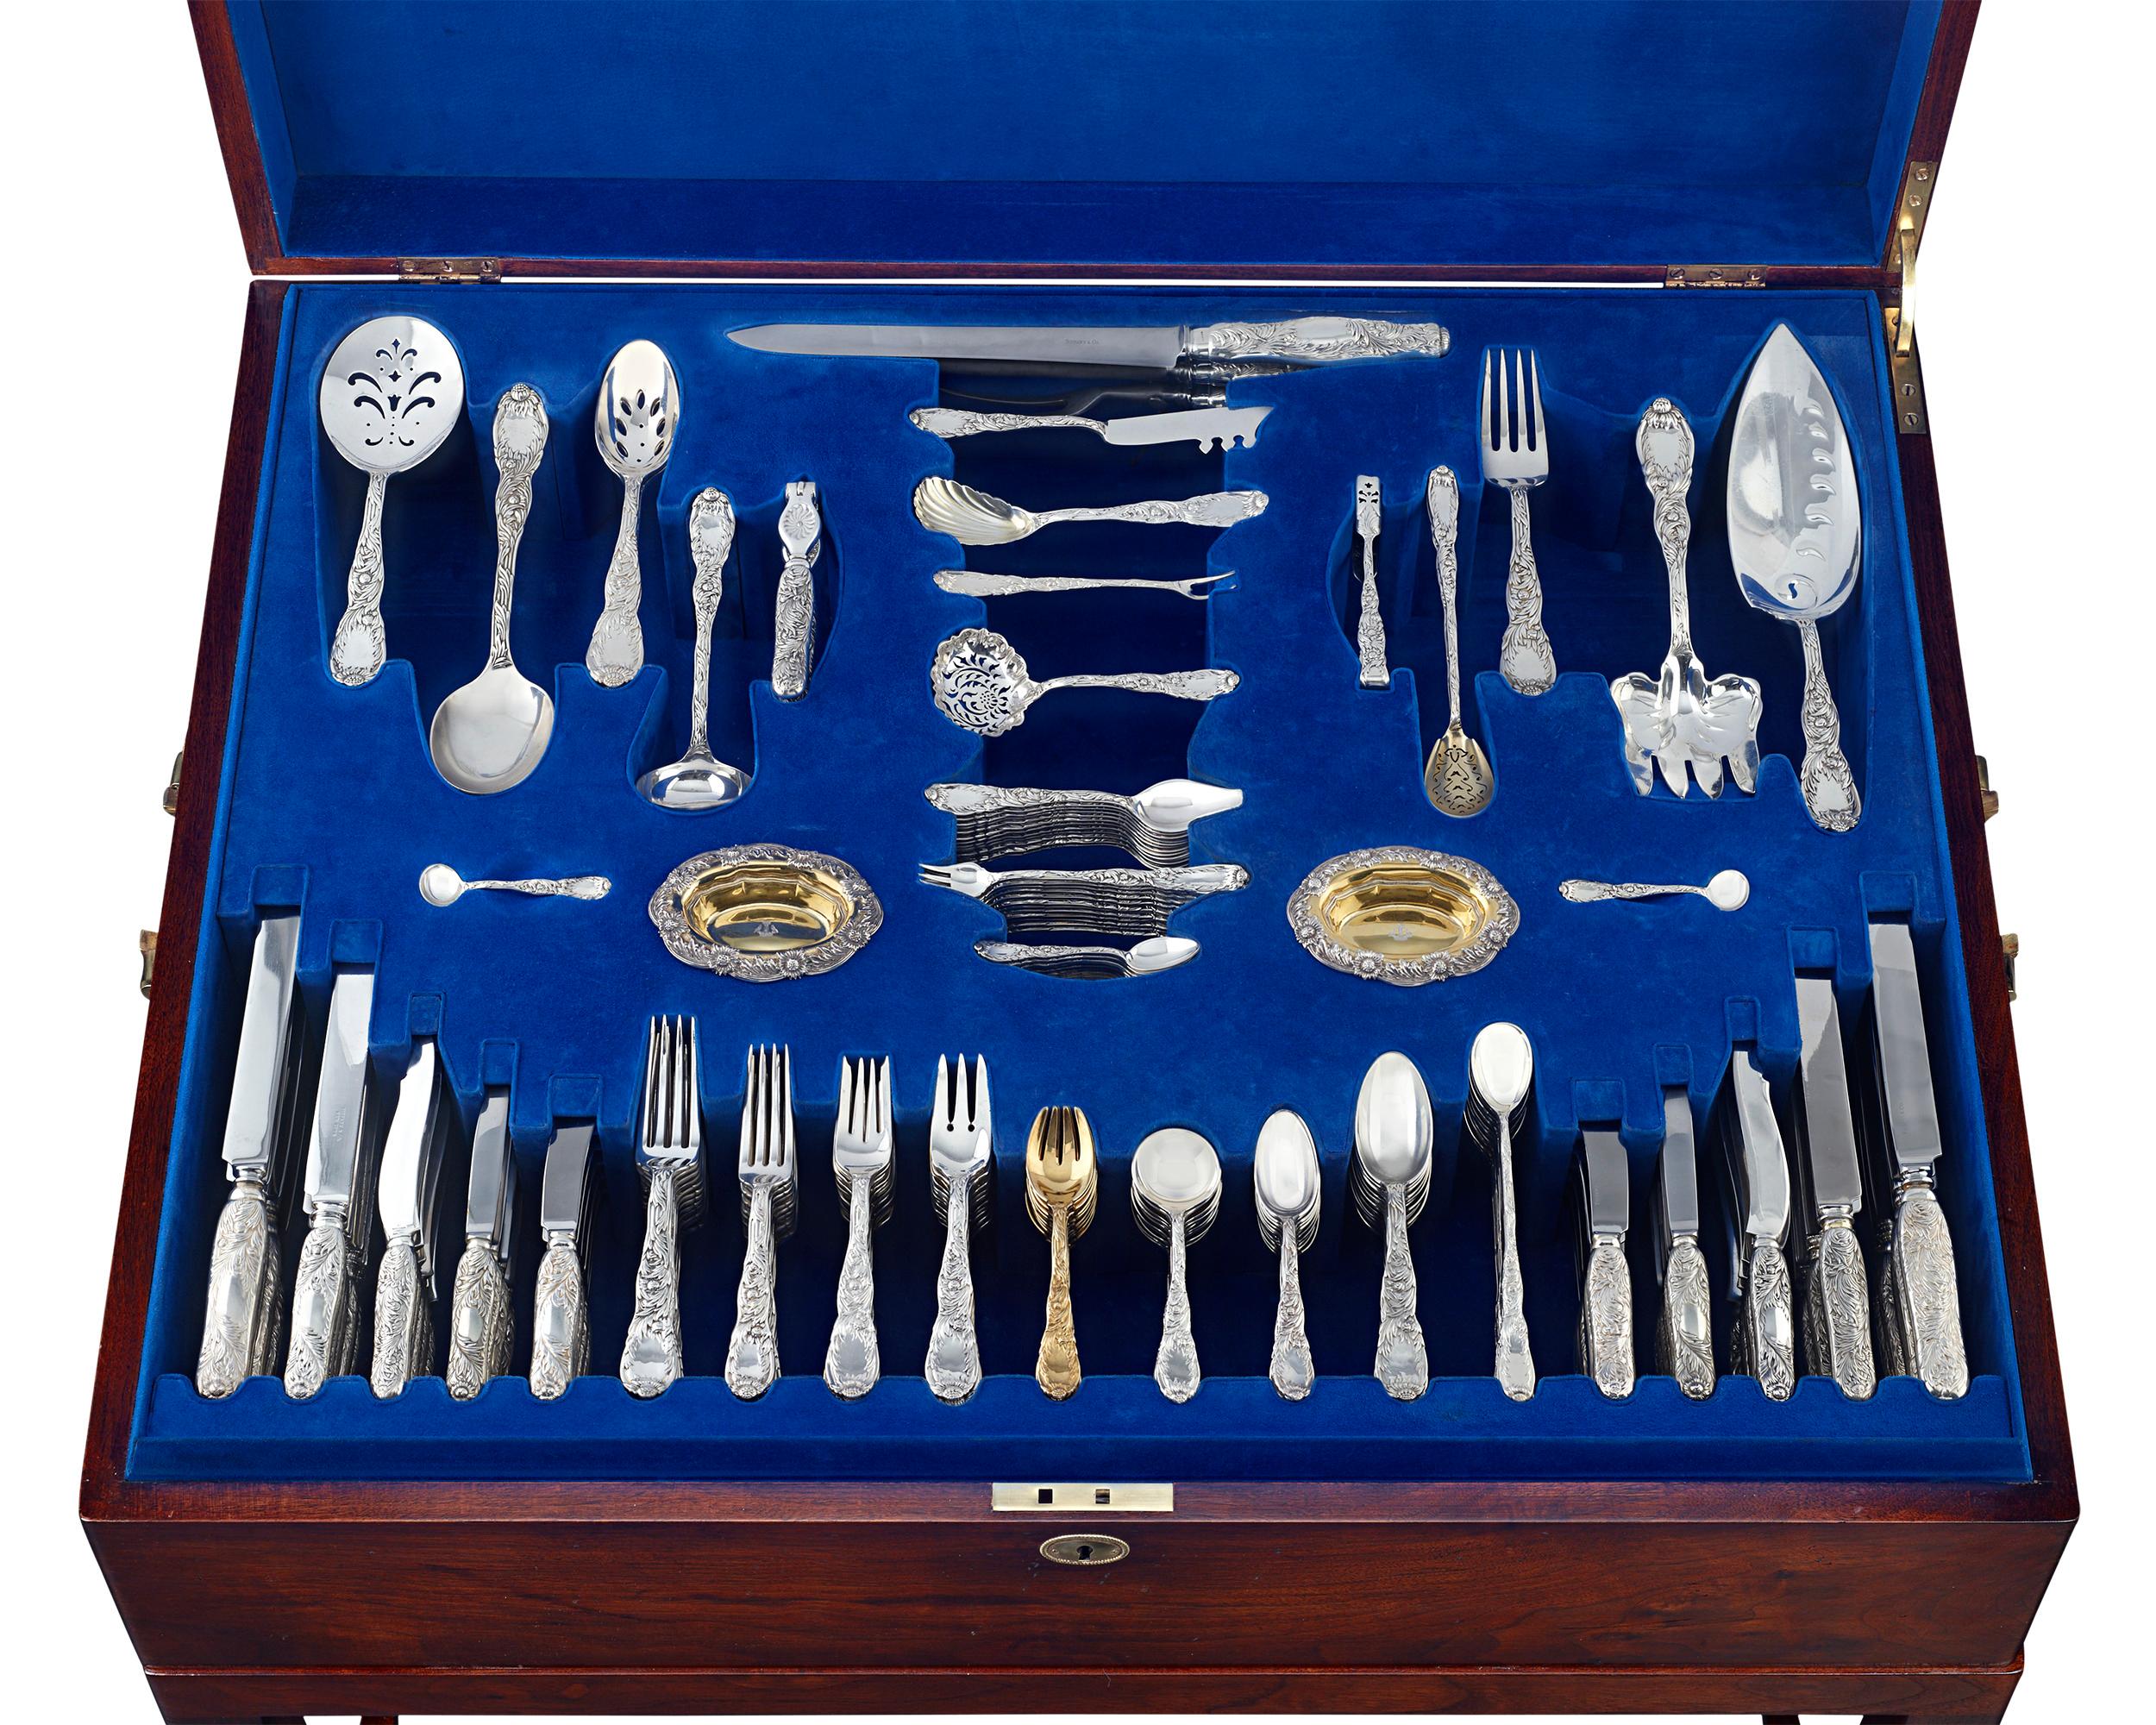 This exceptional 226-piece antique Tiffany & Co. sterling flatware service for 12 features the highly desirable Chrysanthemum pattern. Introduced in 1878 and patented in 1880, the Chrysanthemum pattern is considered among Tiffany's most beautiful